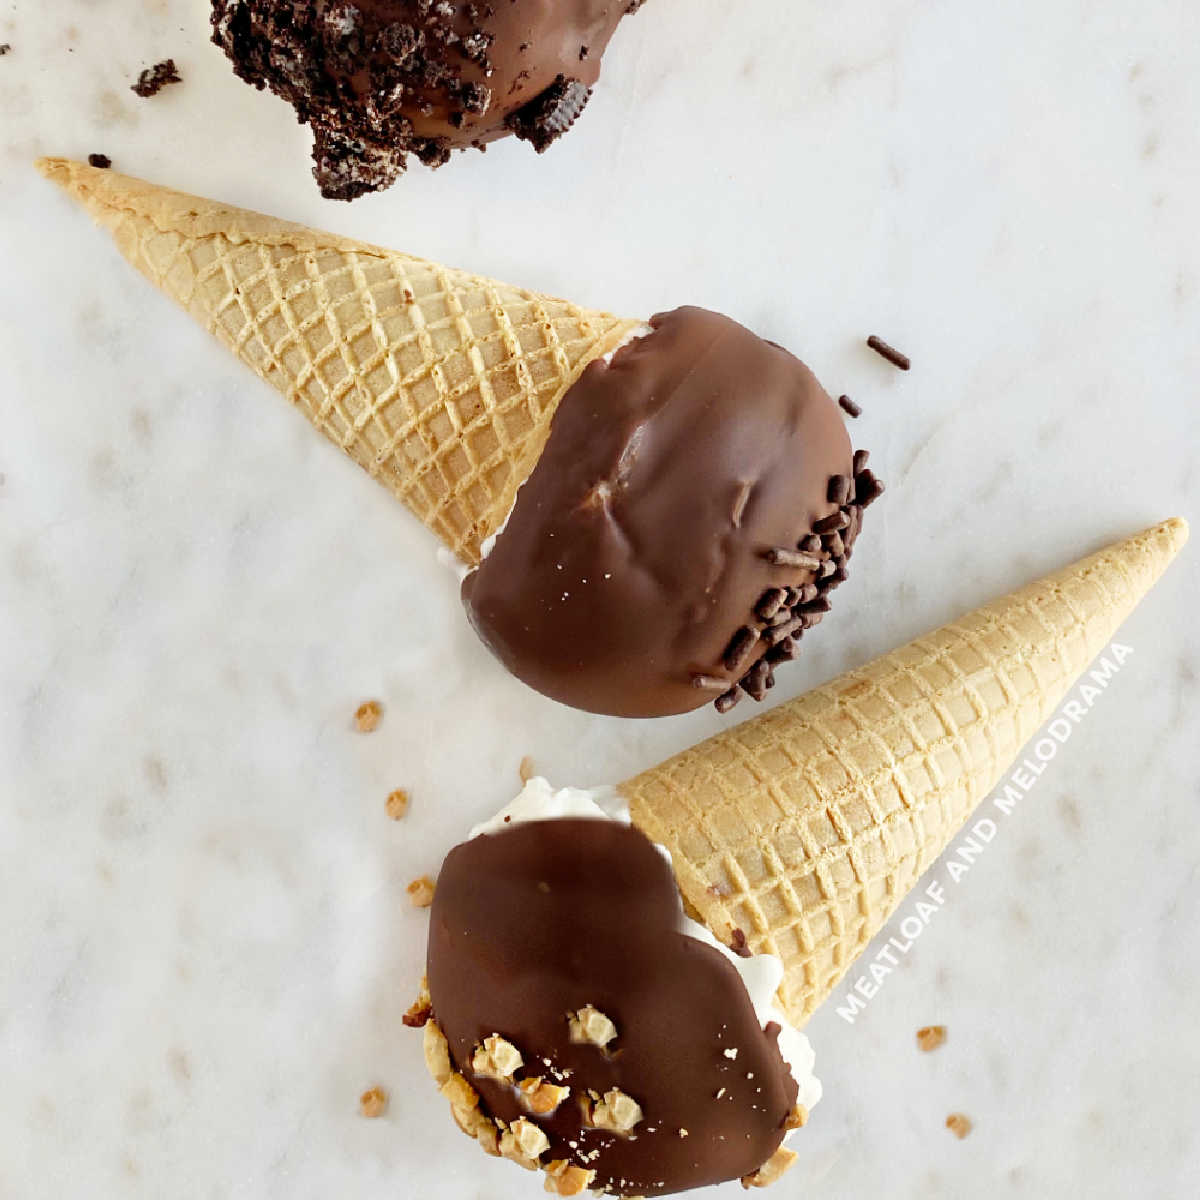 homemade drumsticks ice cream cones with chocolate coating on marble surface